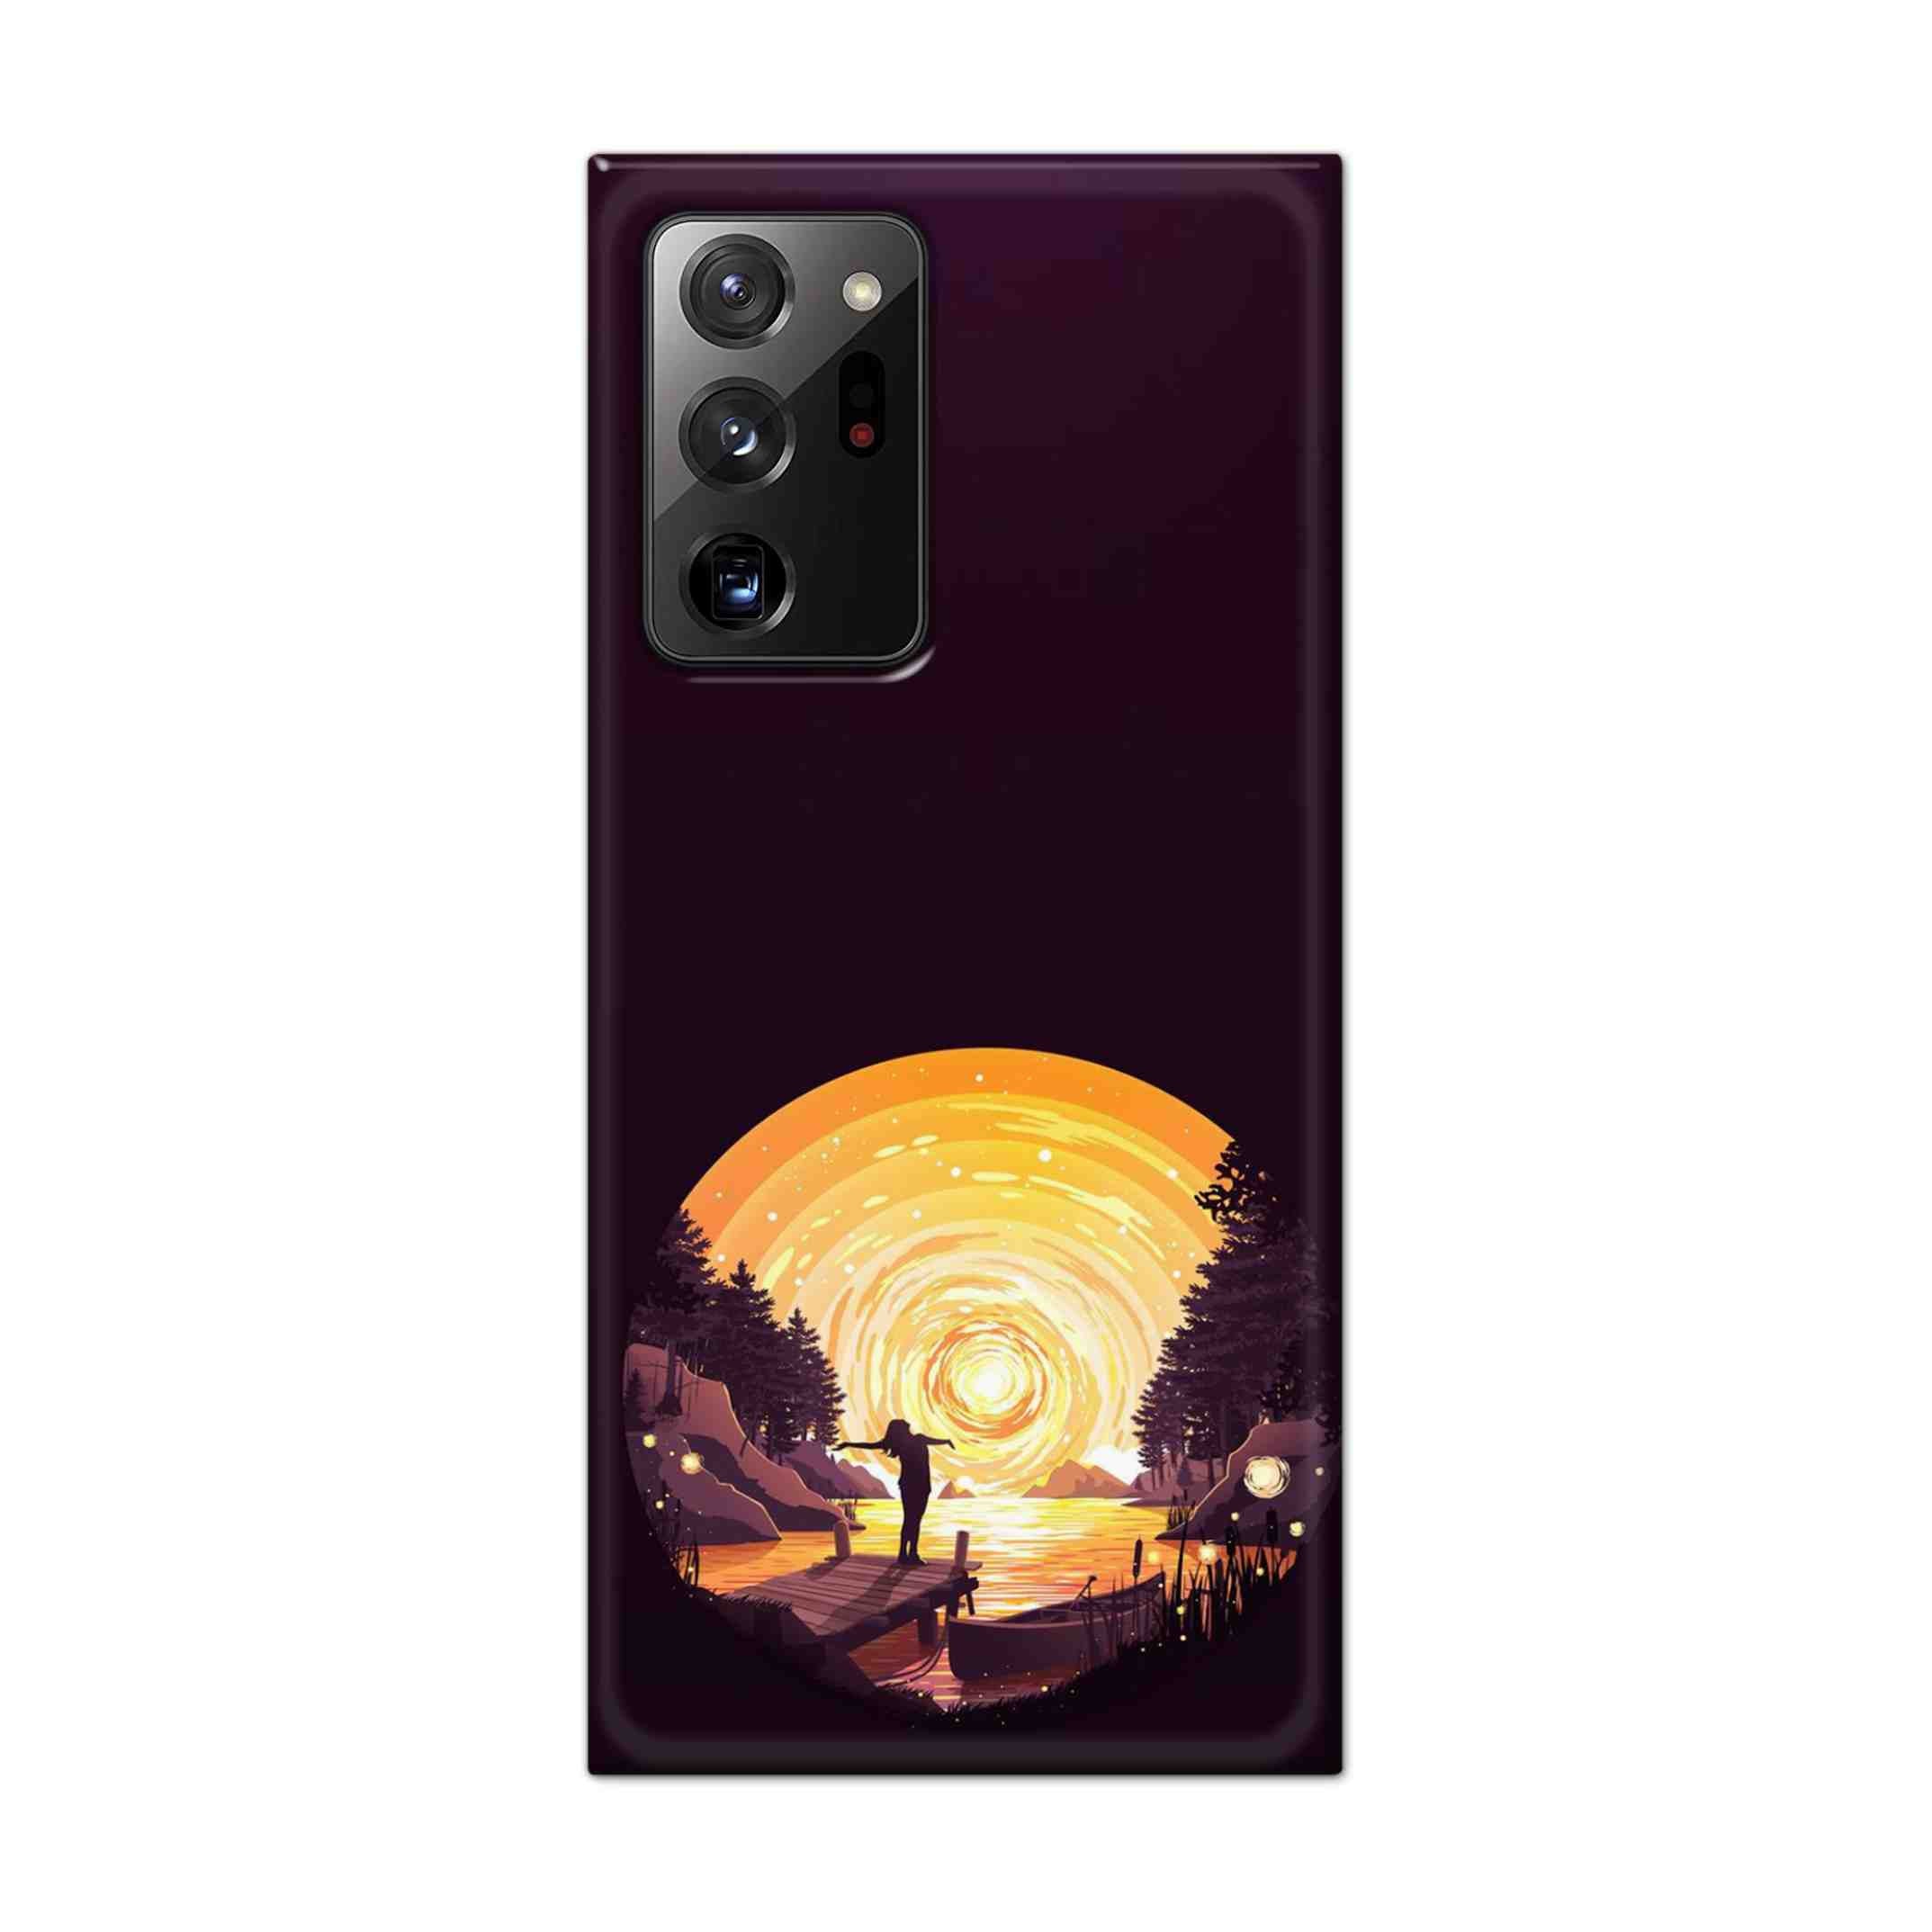 Buy Night Sunrise Hard Back Mobile Phone Case Cover For Samsung Galaxy Note 20 Ultra Online